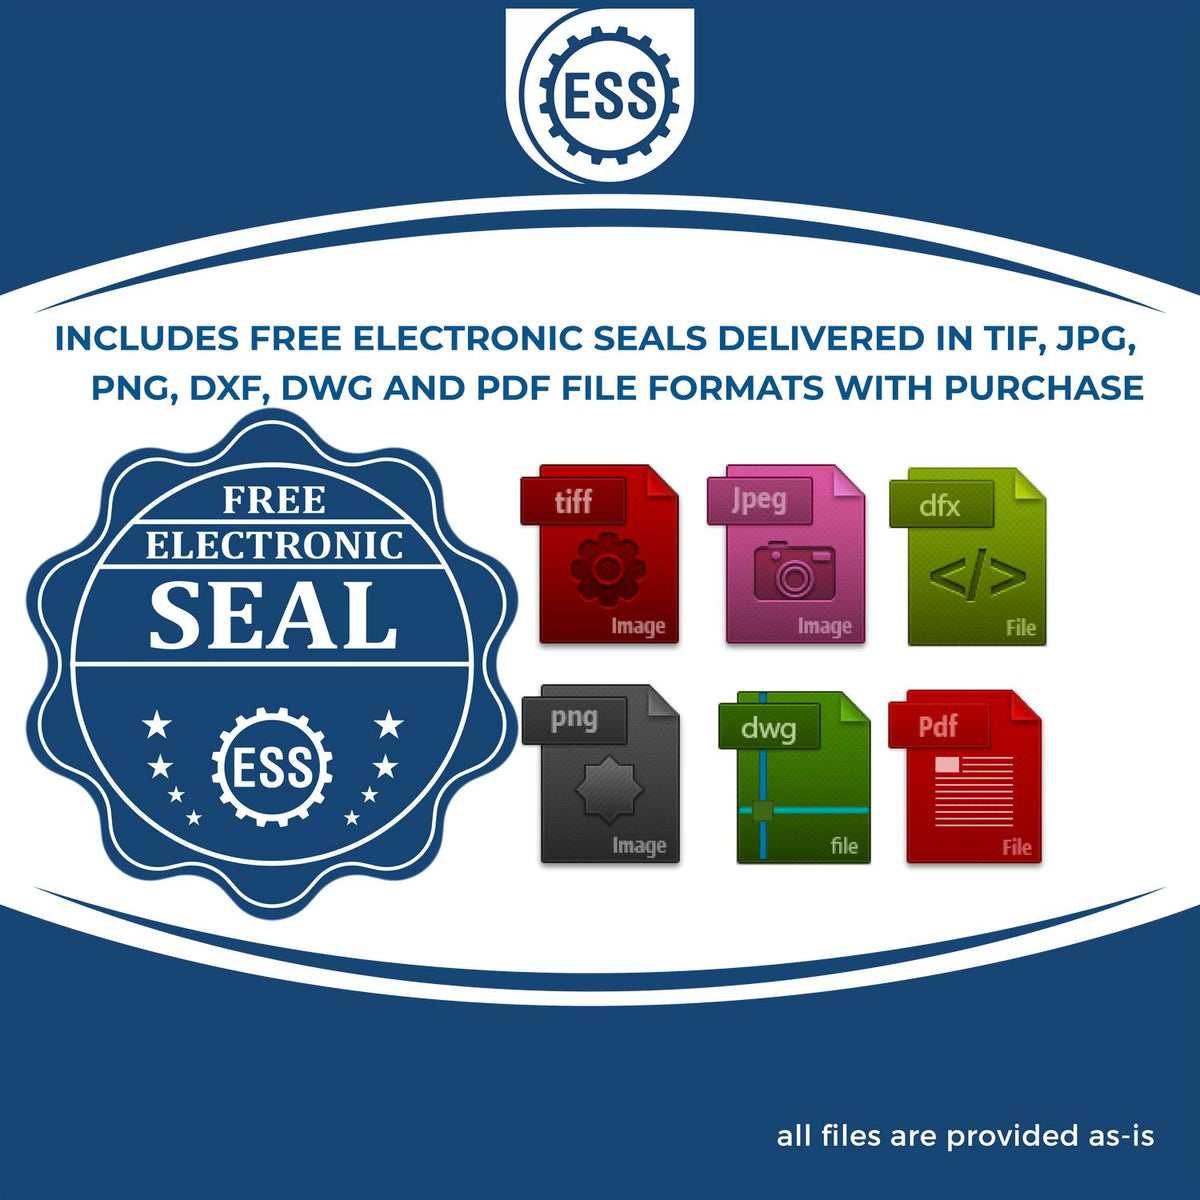 An infographic for the free electronic seal for the Premium MaxLight Pre-Inked Utah Engineering Stamp illustrating the different file type icons such as DXF, DWG, TIF, JPG and PNG.